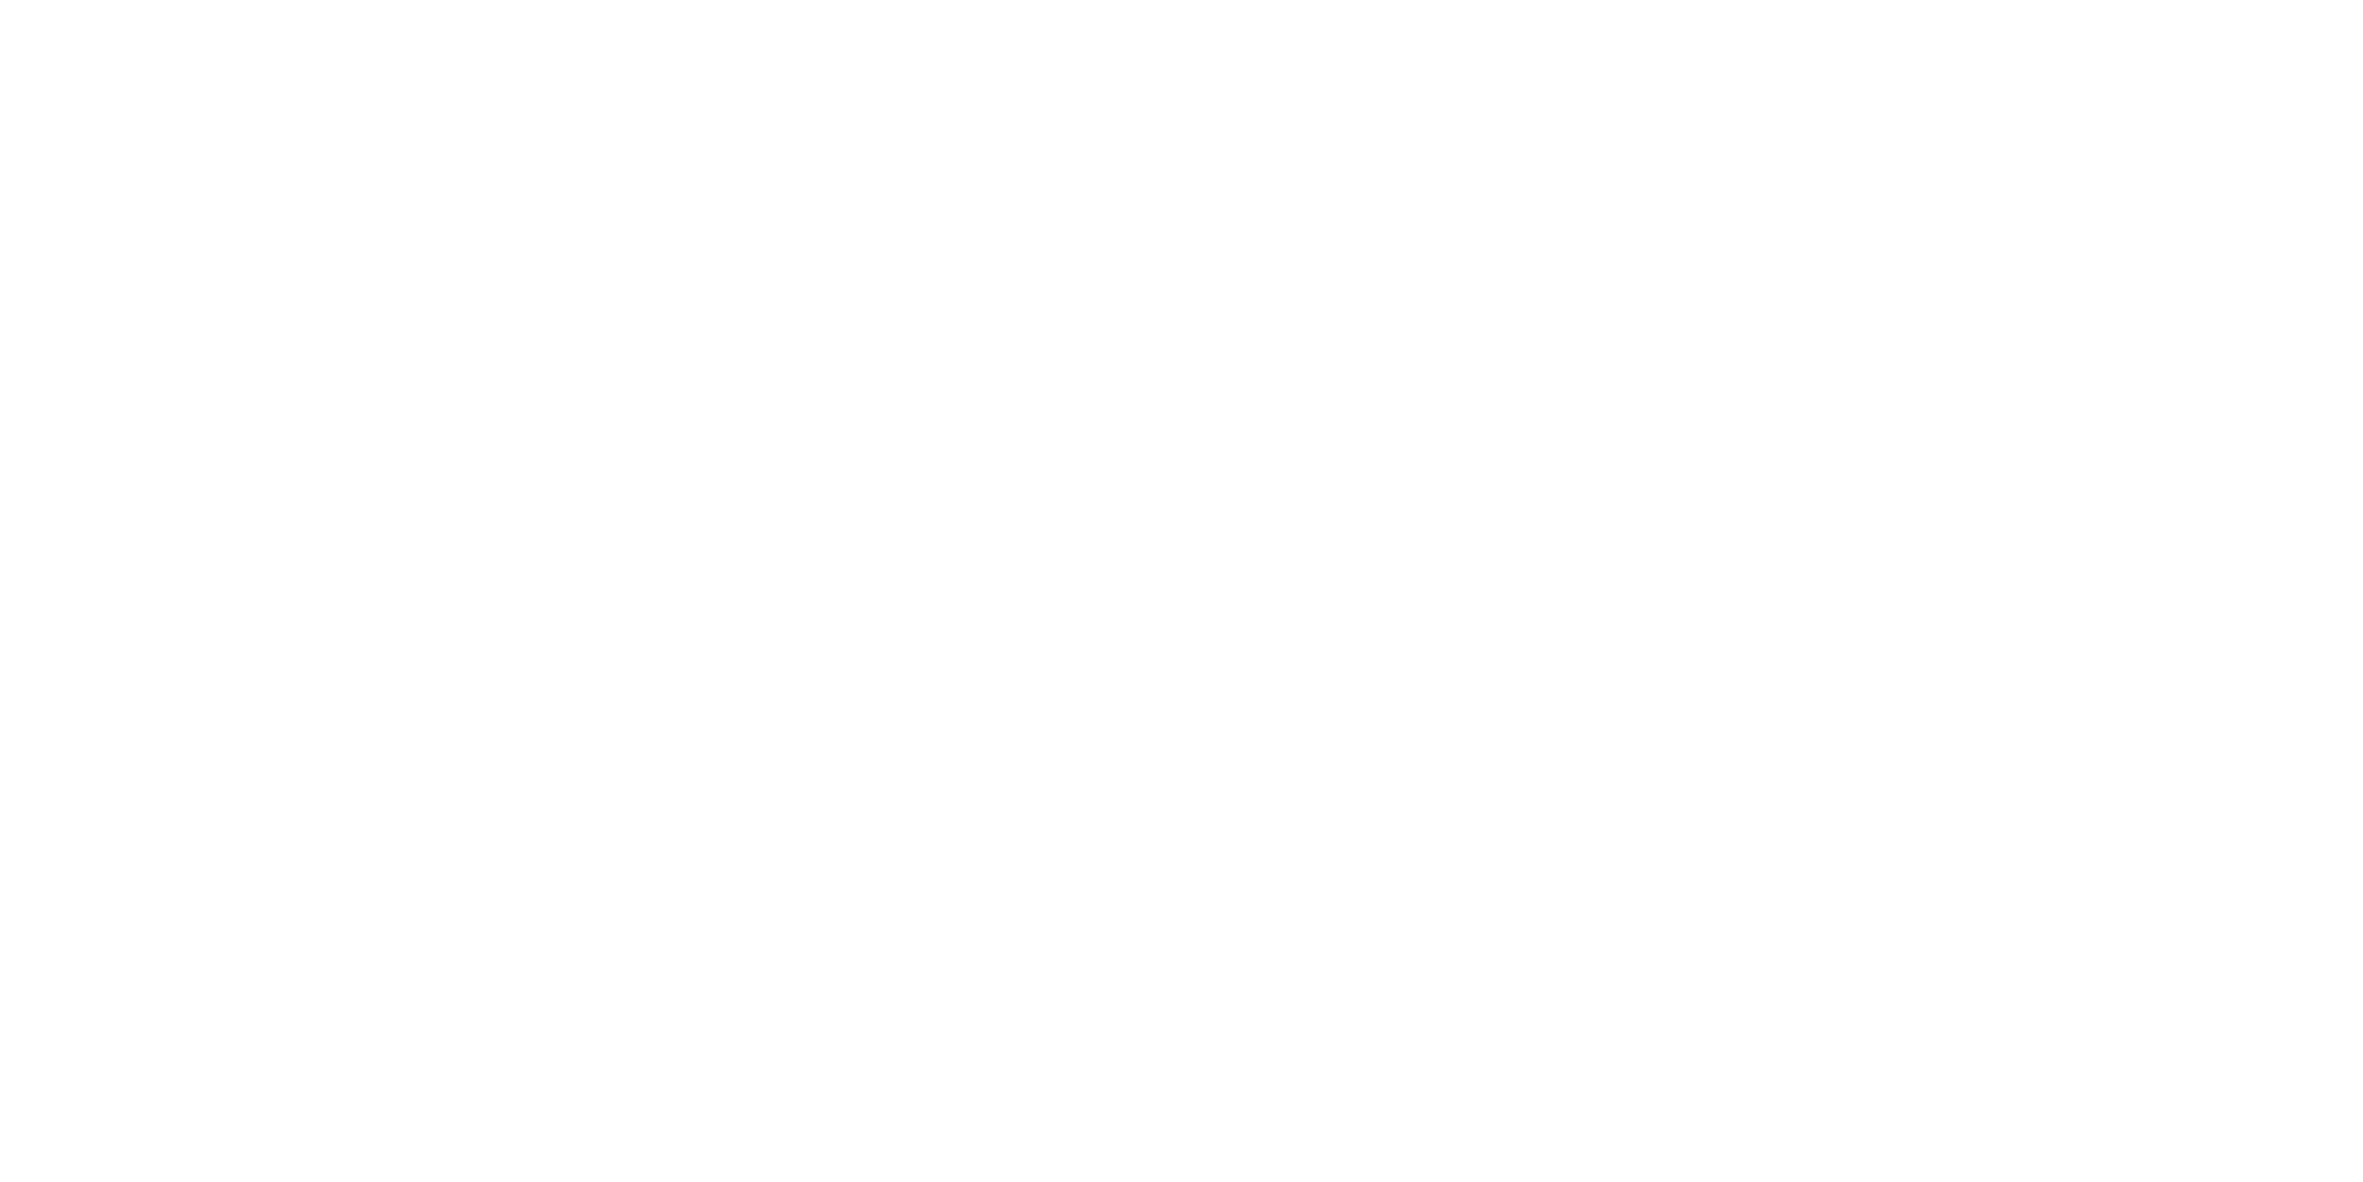 Visual-1 - Your best visual partner